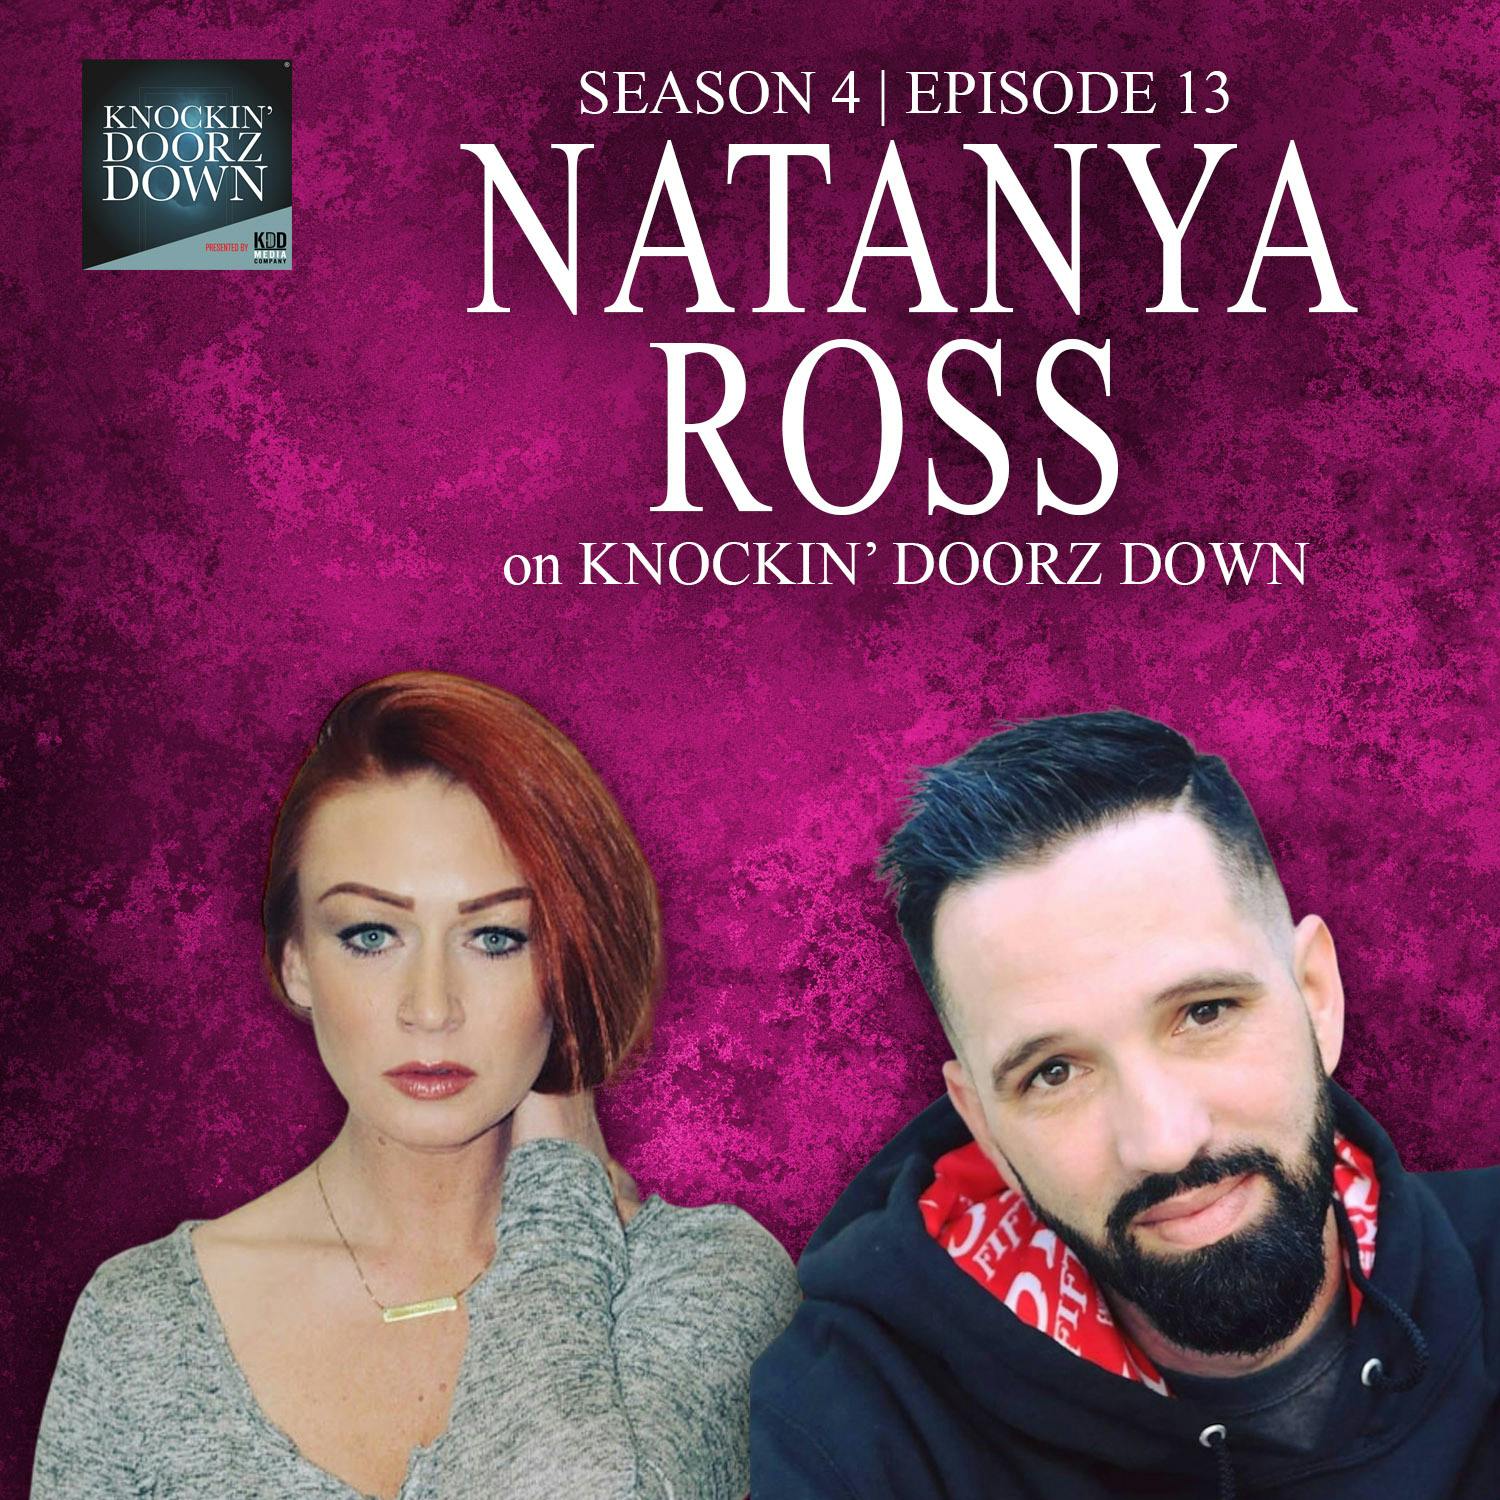 Natanya Ross | From Child Star To Sober Inspiration, Being Of Service To Others & Career Resurgence